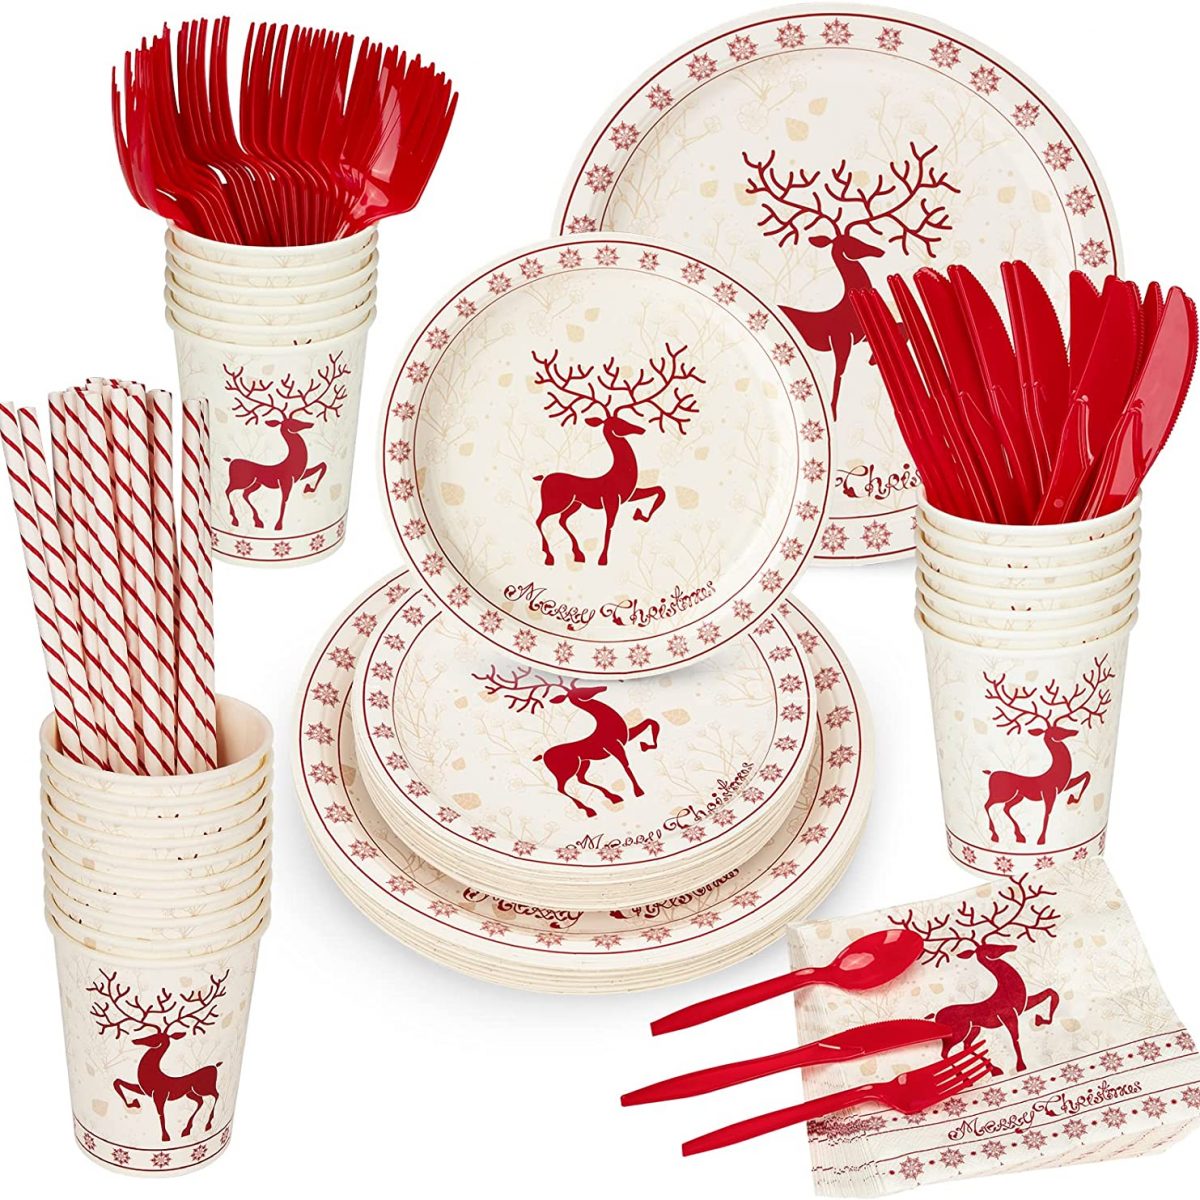 Rustic Christmas Pack! Disposable Paper Plates, Napkins, Cups